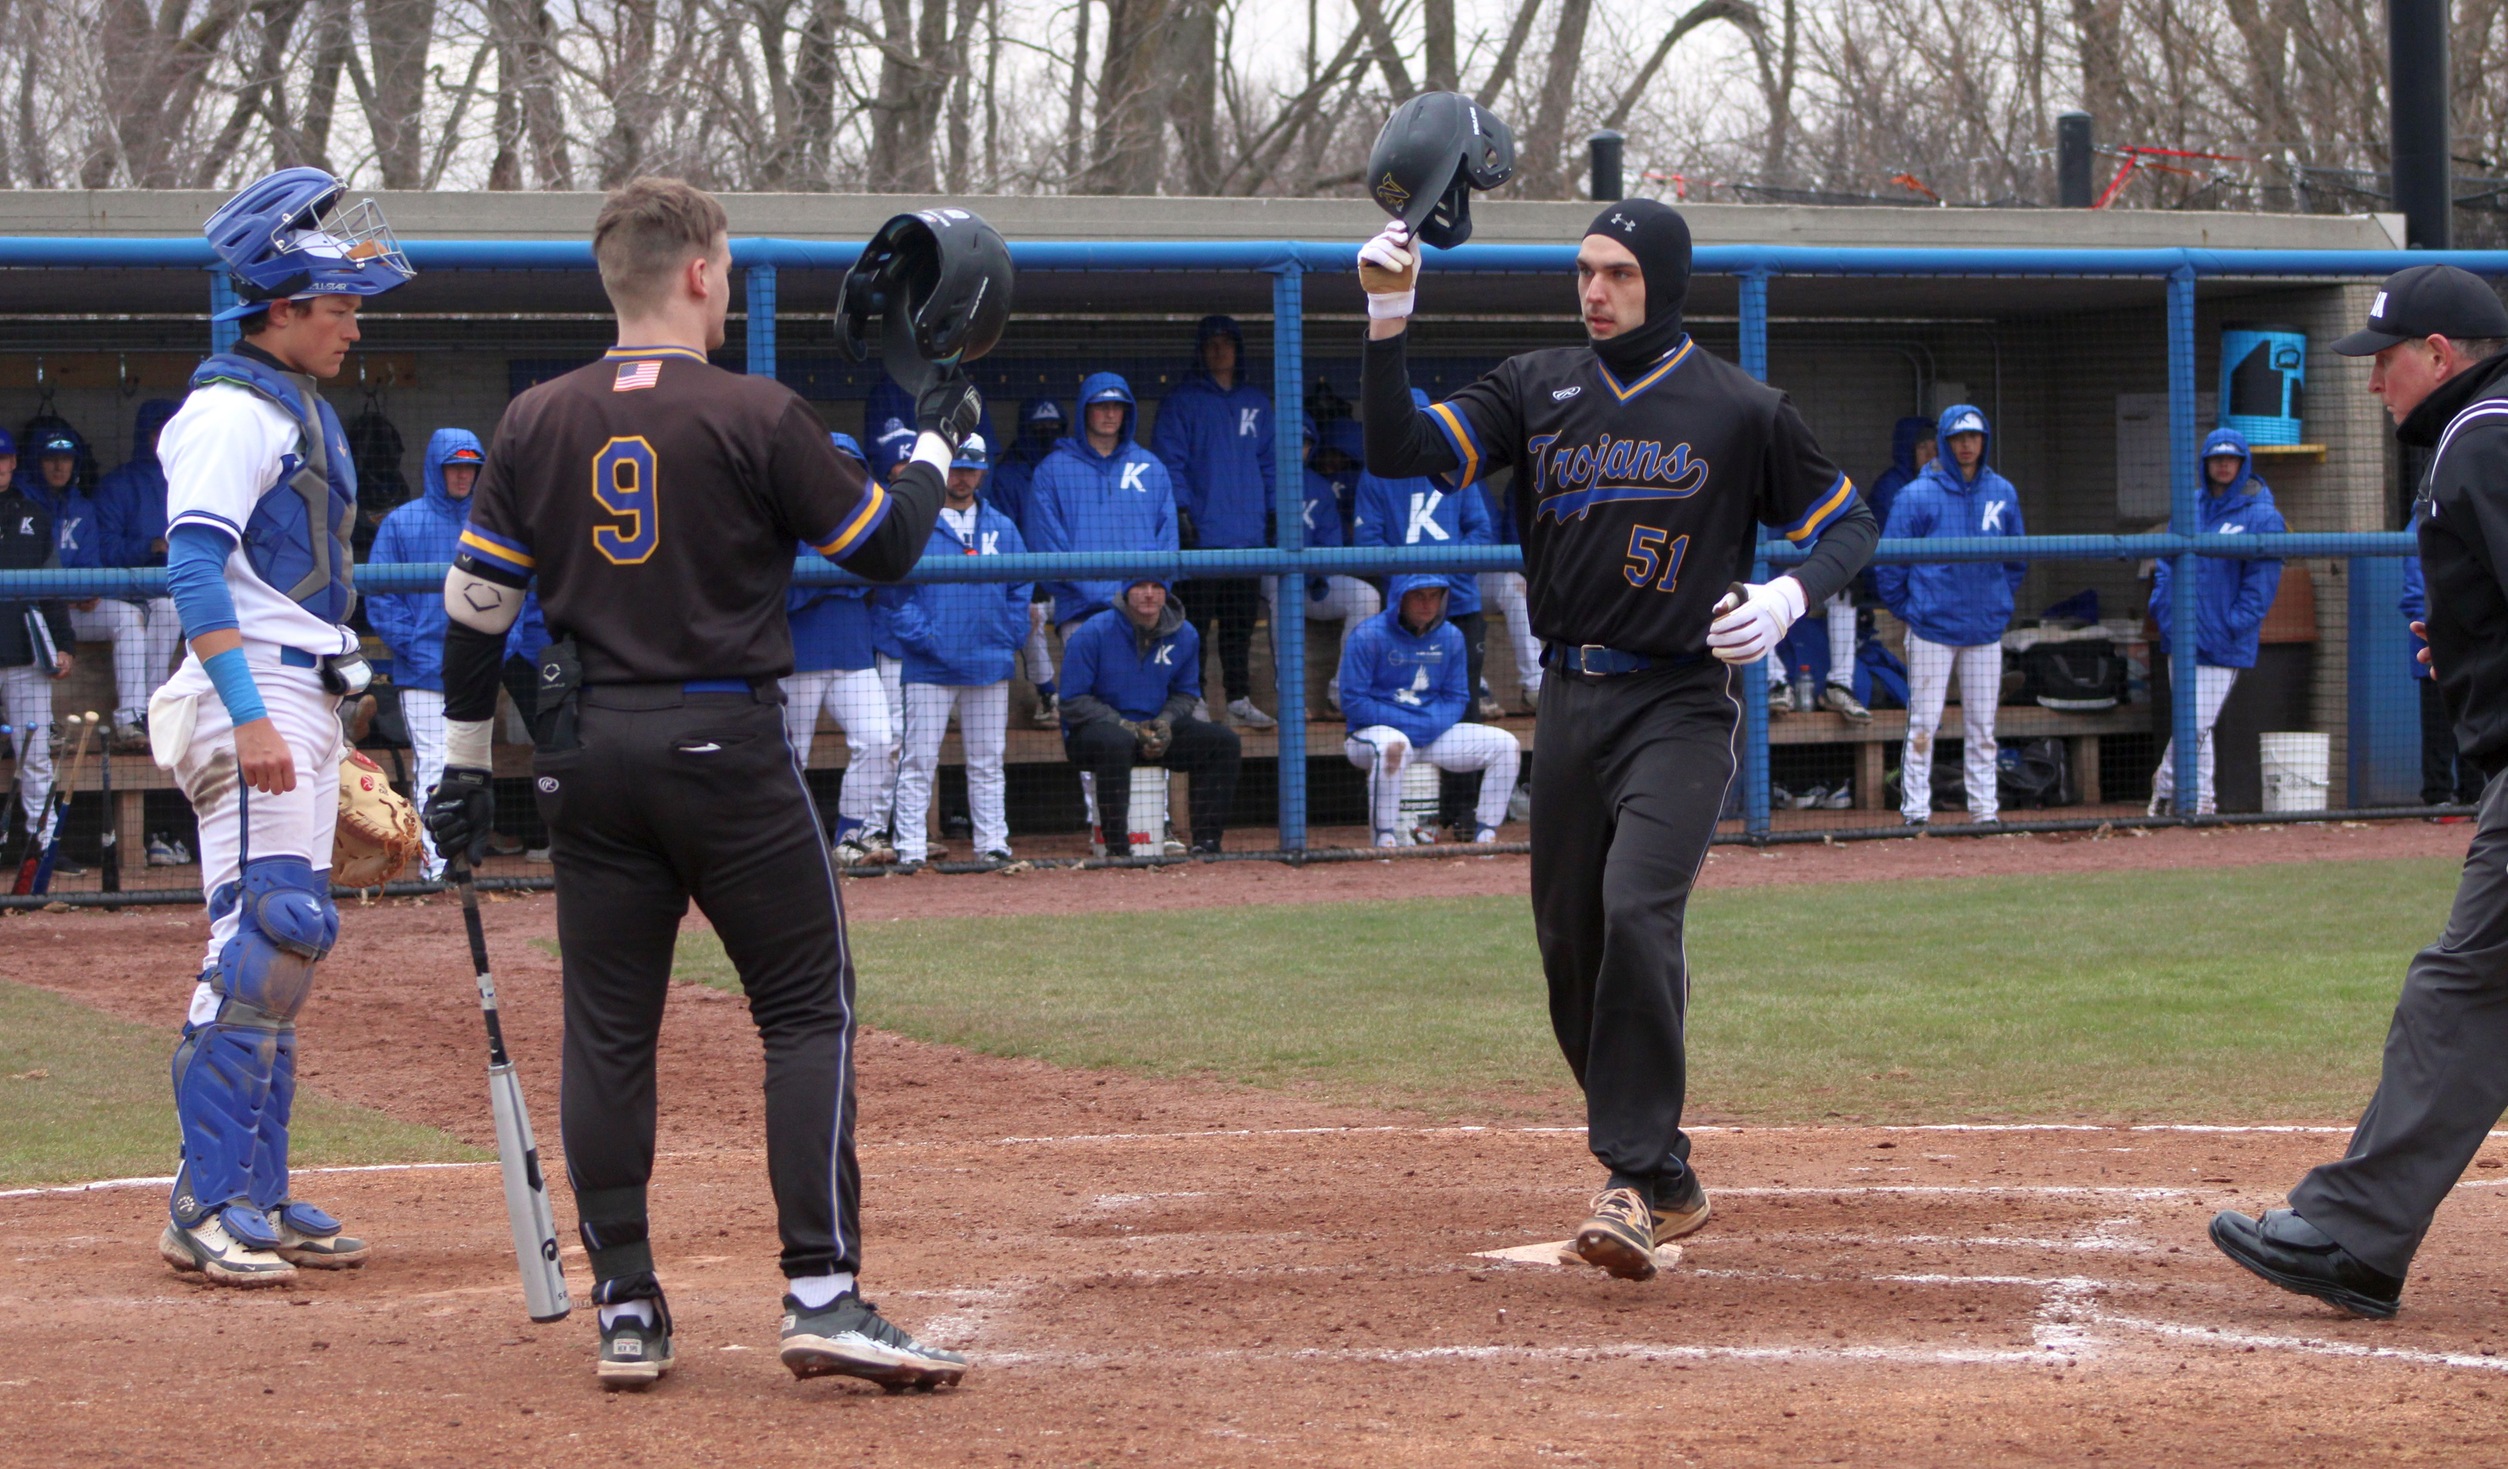 NIACC's Cody Kelly crosses home plate after hitting a solo home run in the ninth inning of Wednesday's 21-17 win at Kirkwood.